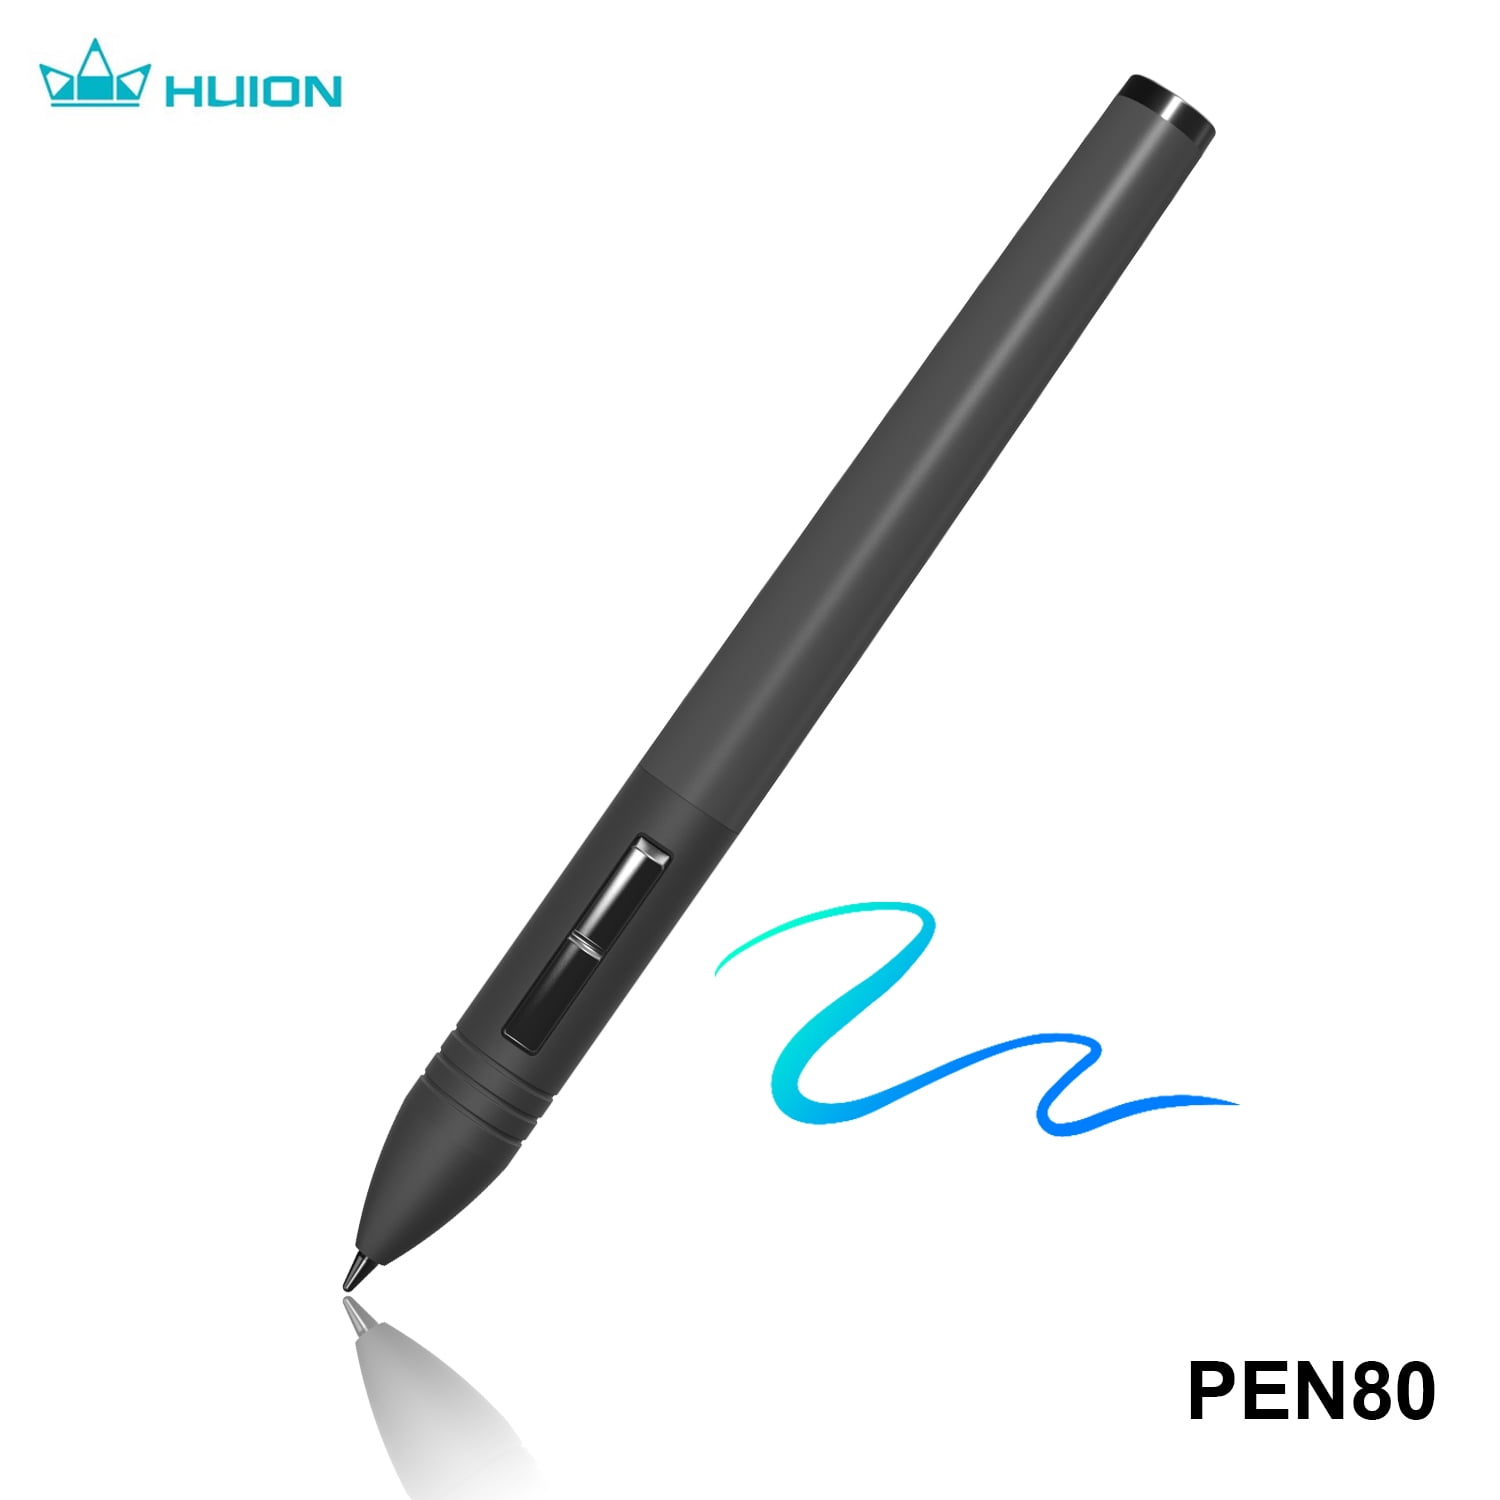 HUION Replacement Rechargeable Pen P80 for Huion Graphic Tablets 4 free pen tips 